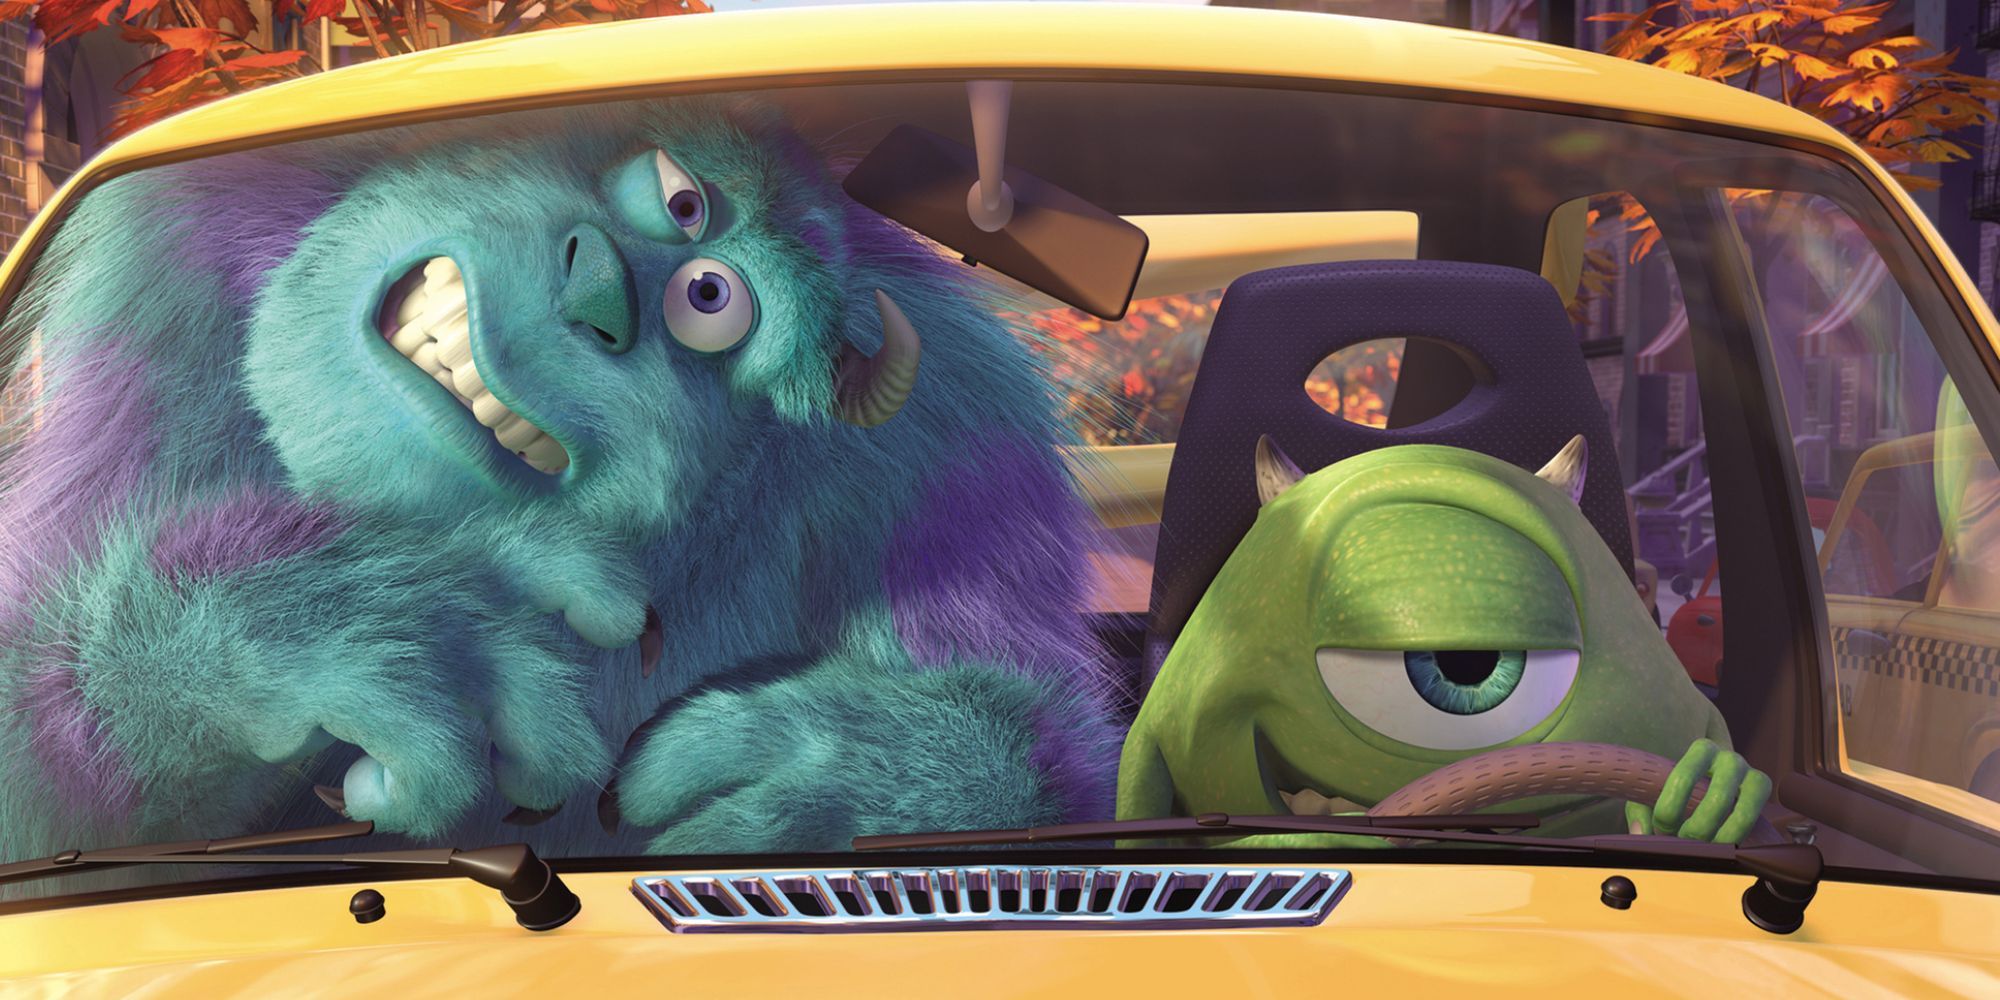 Mike looking happy in his new car as Sulley looks in pain due to the car's small size in the Mike's New Car animated short